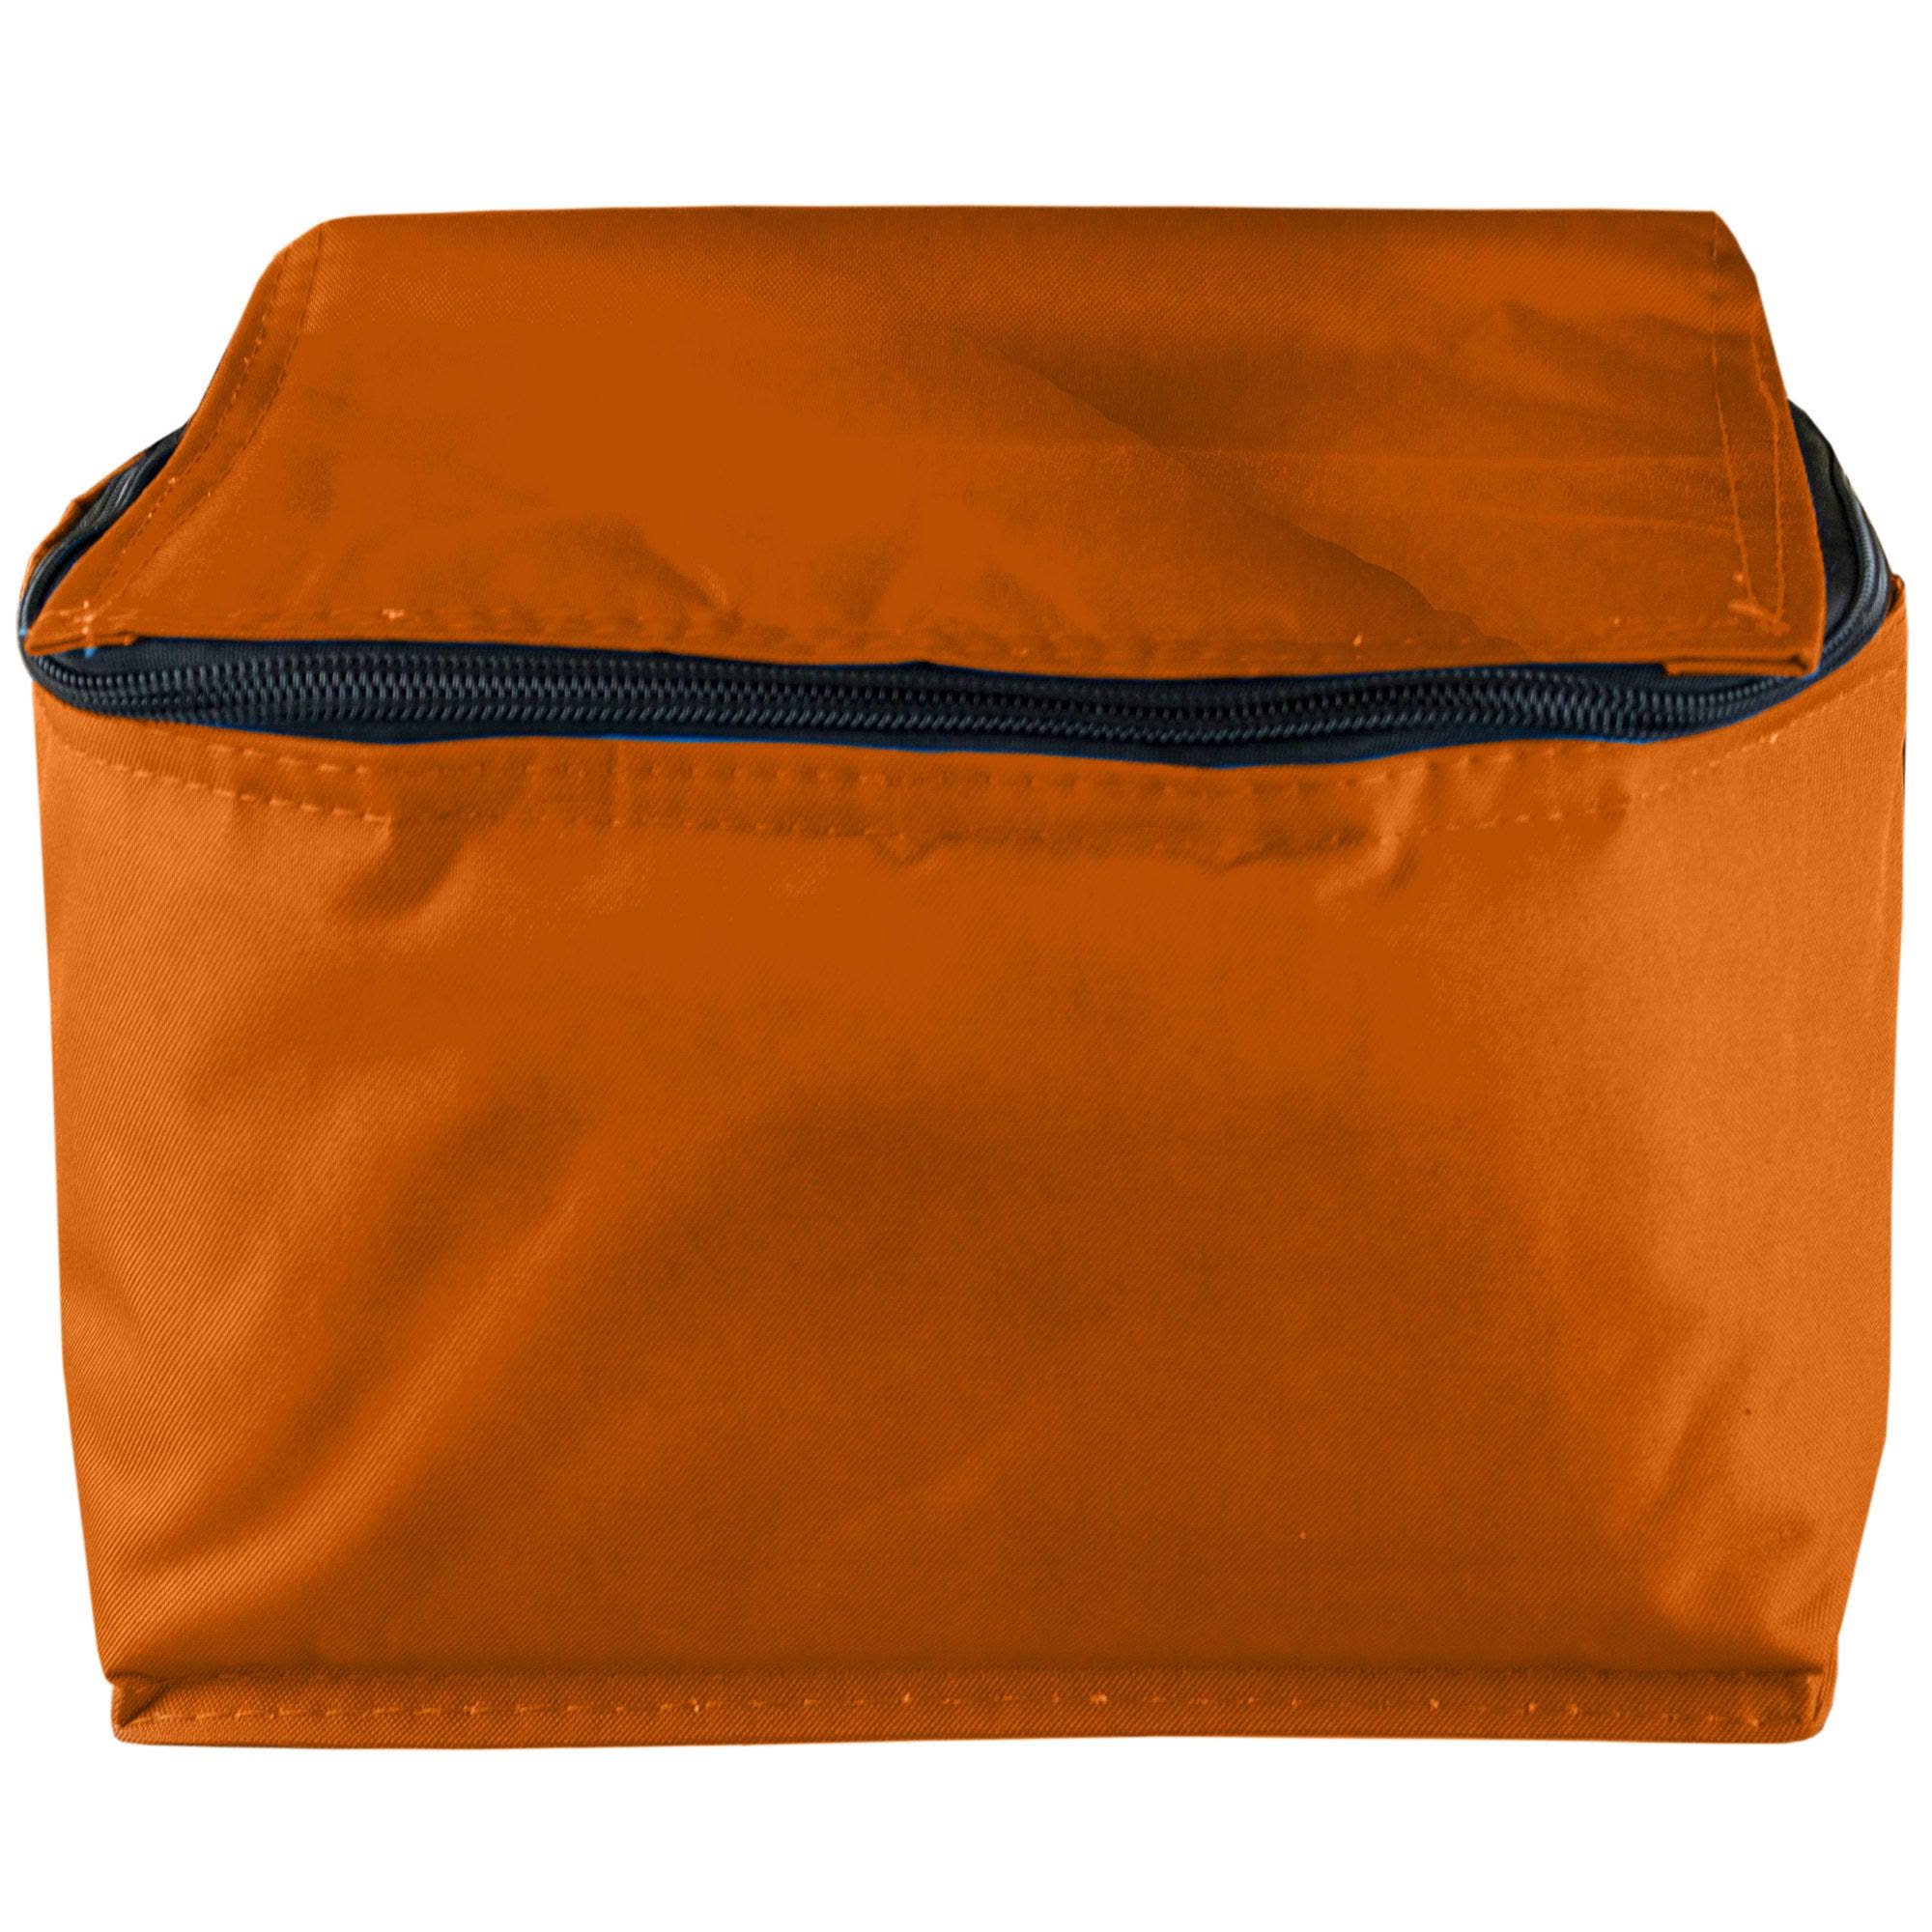 Easylunchboxes Insulated Lunch Box Cooler Bag, Orange